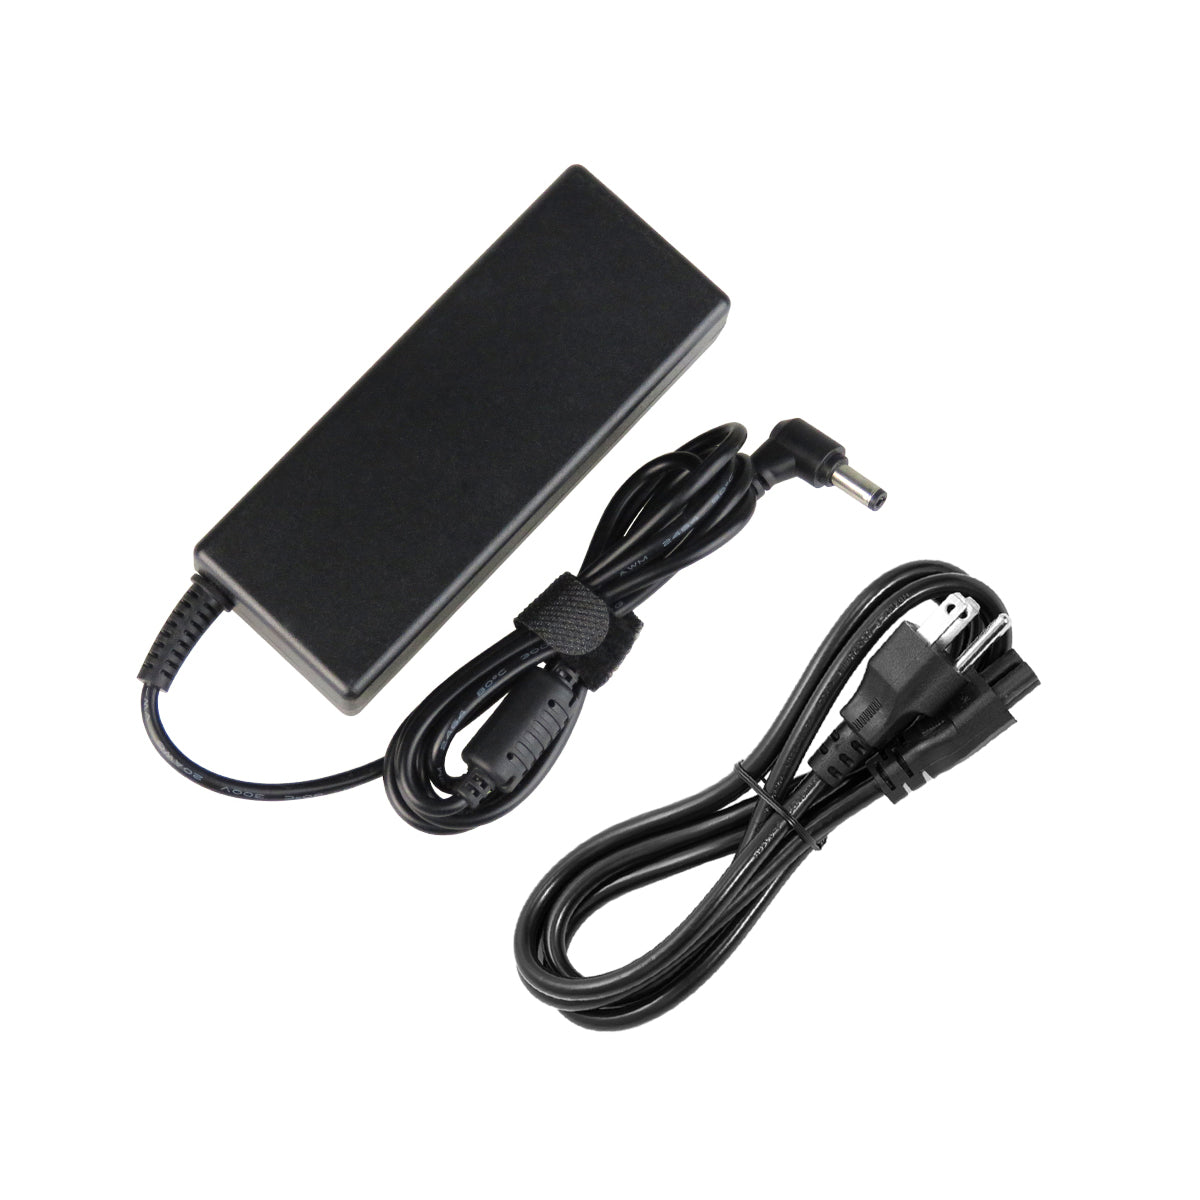 AC Adapter Charger for ASUS X81 Series Notebook.